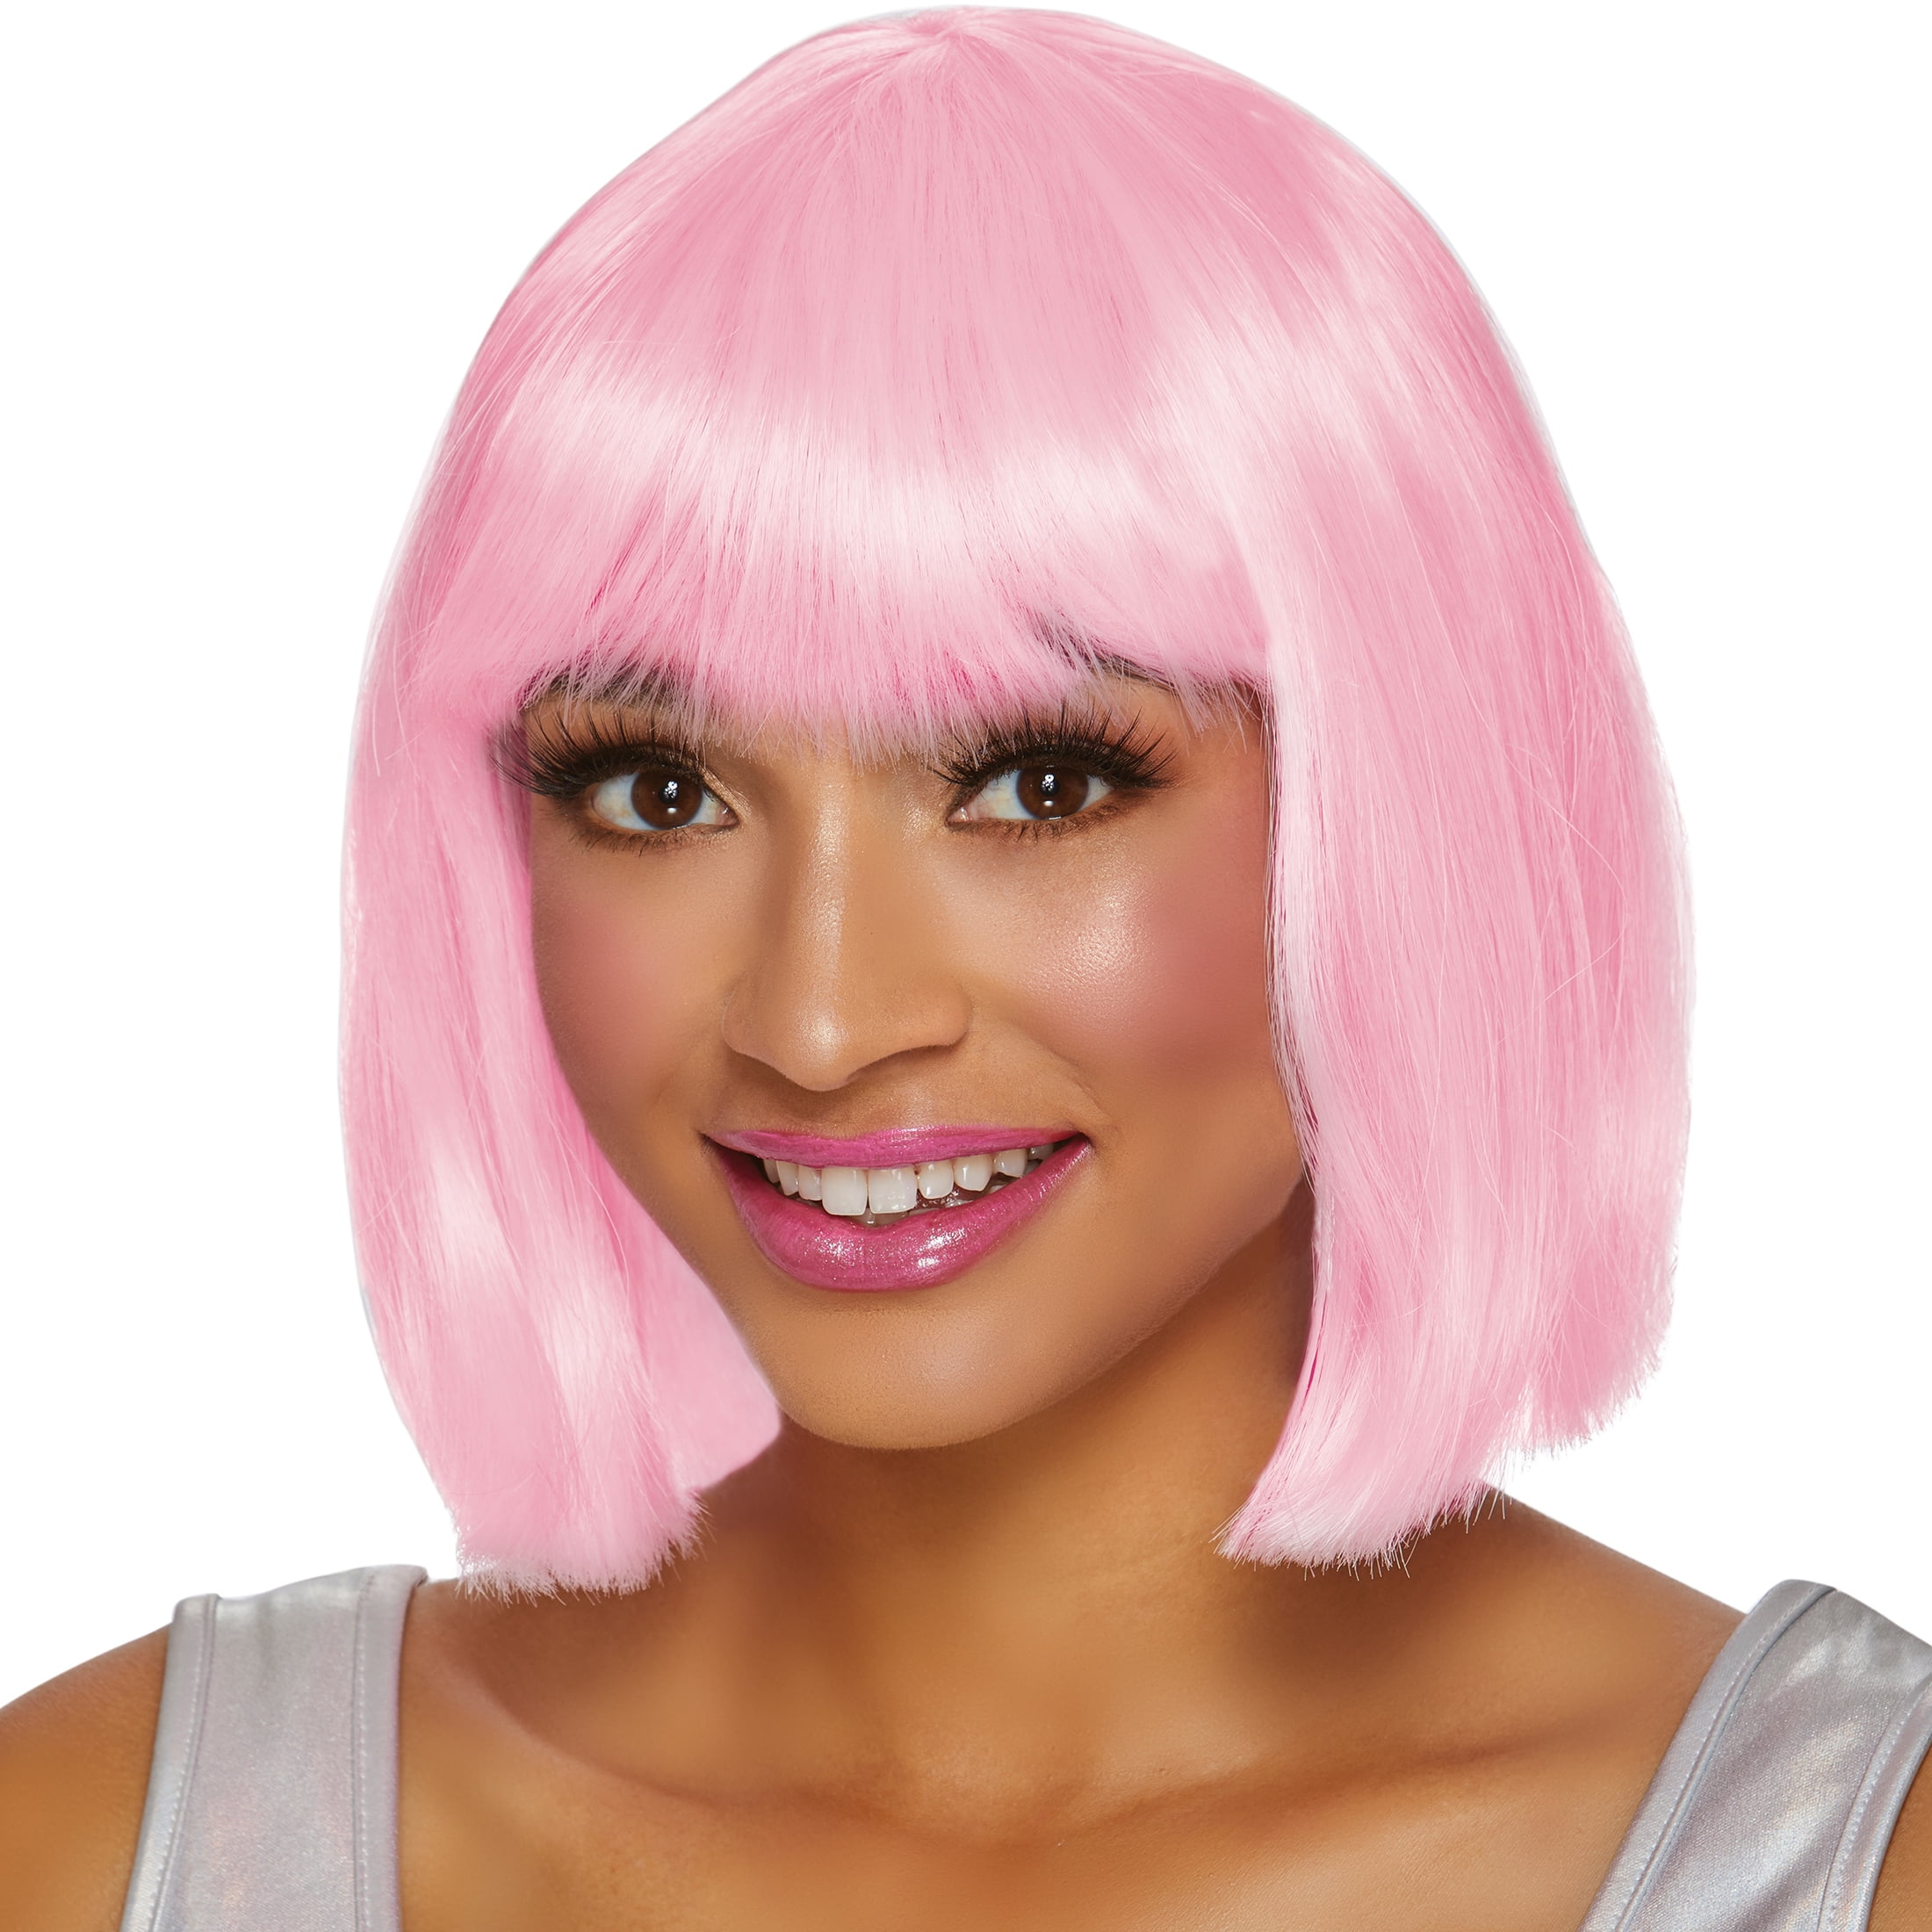 Pretty in Pink Wig Costume Adult Halloween